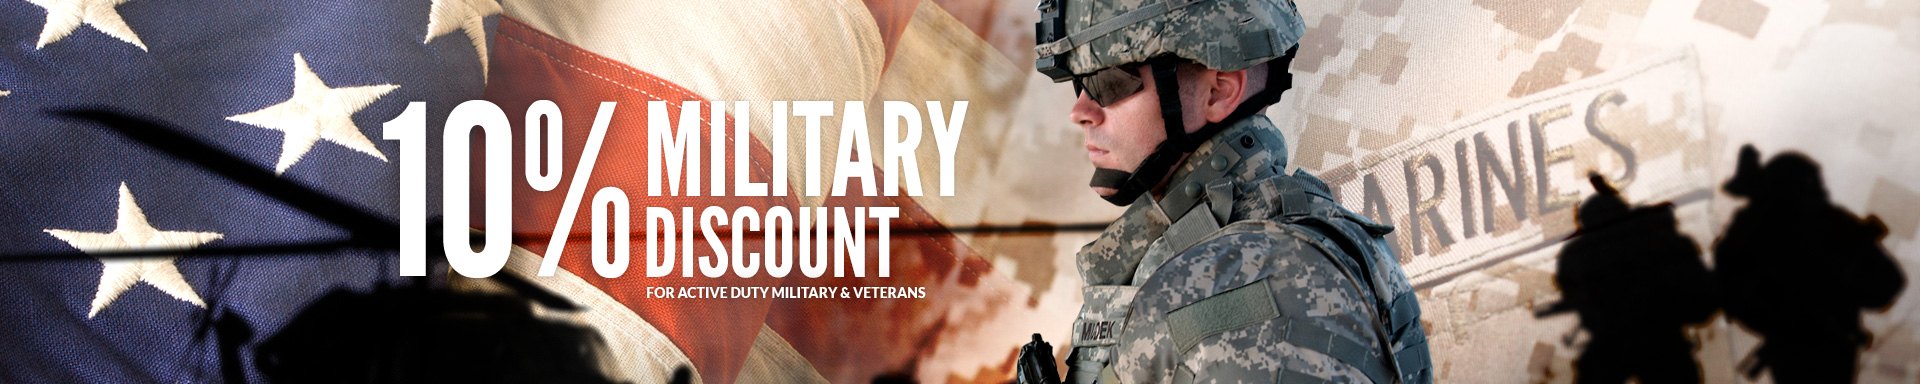 Military Discounts at MOTORCYCLEiD.com